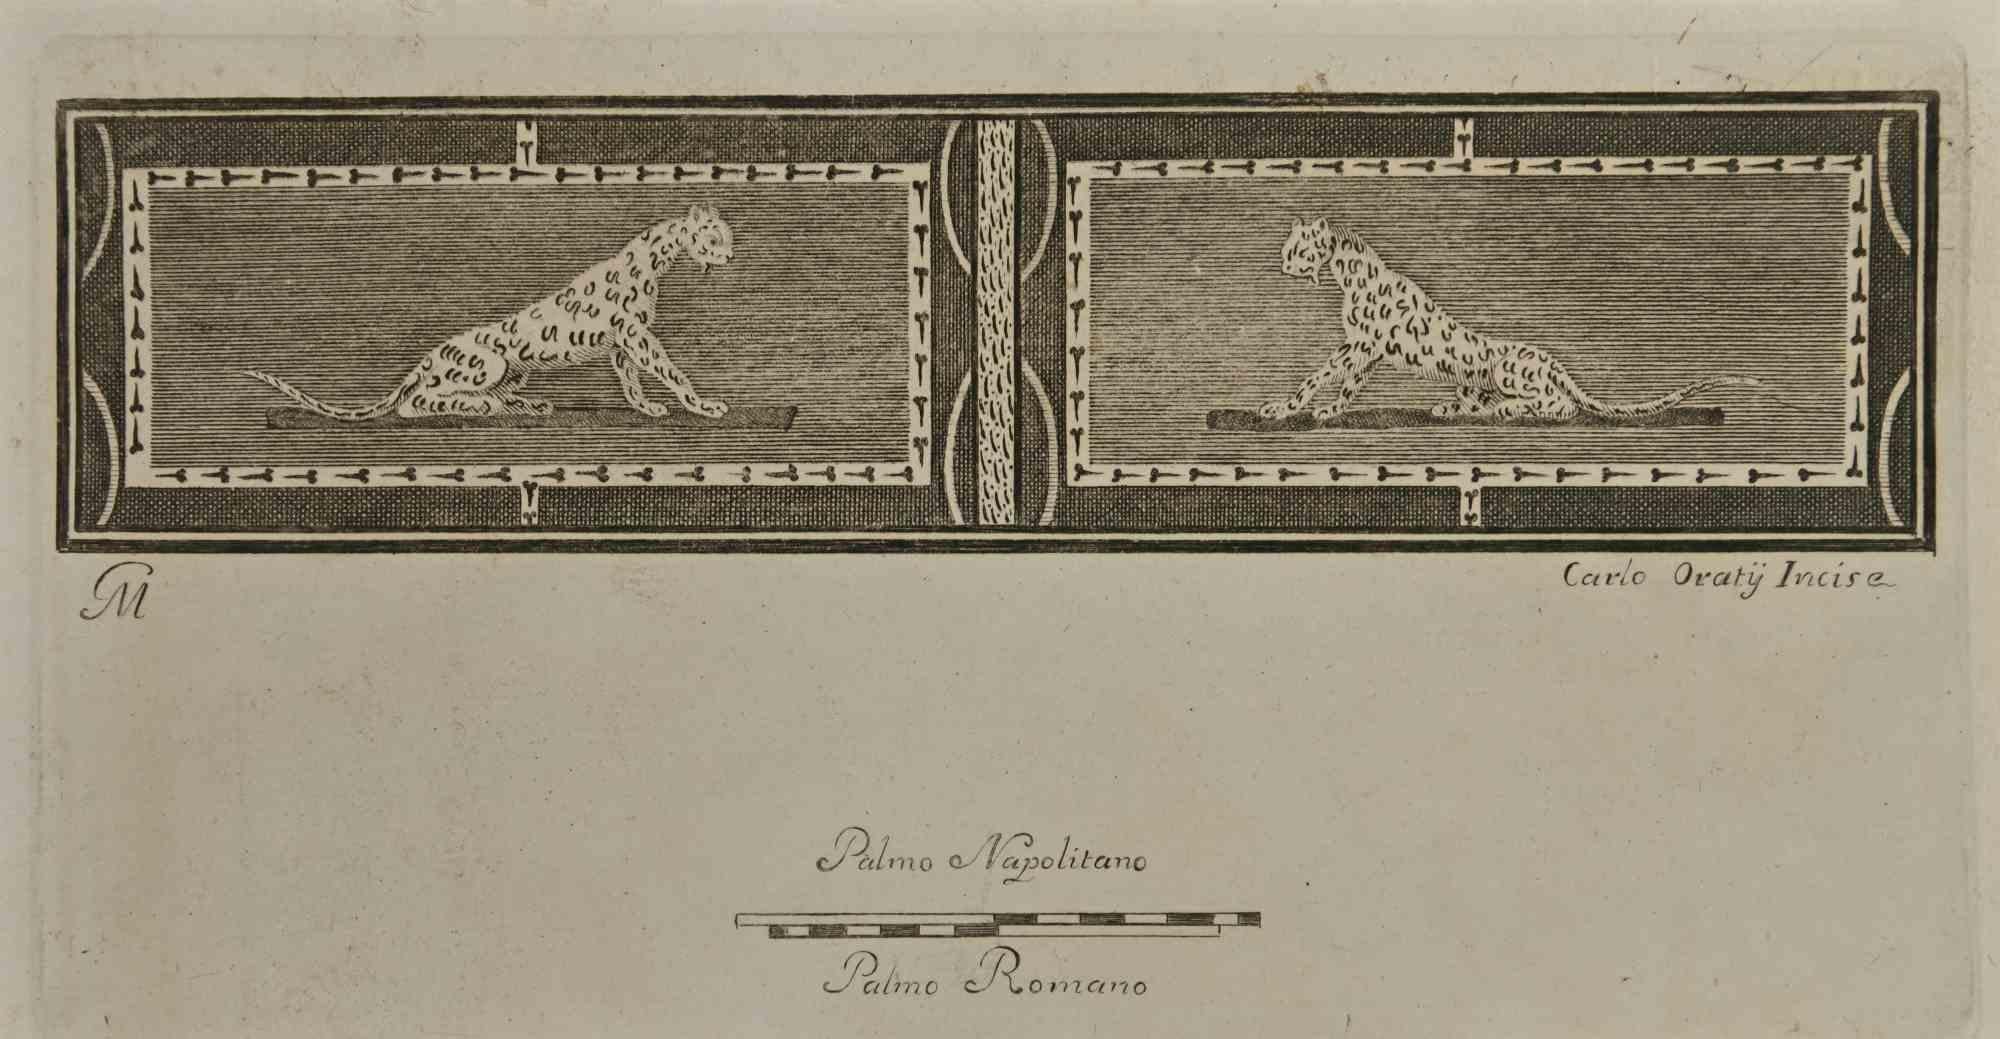 Jaguar Pompeian Fresco from "Antiquities of Herculaneum" is an etching on paper realized by Carlo Oraty in the 18th Century.

Signed on the plate.

Good conditions.

The etching belongs to the print suite “Antiquities of Herculaneum Exposed”